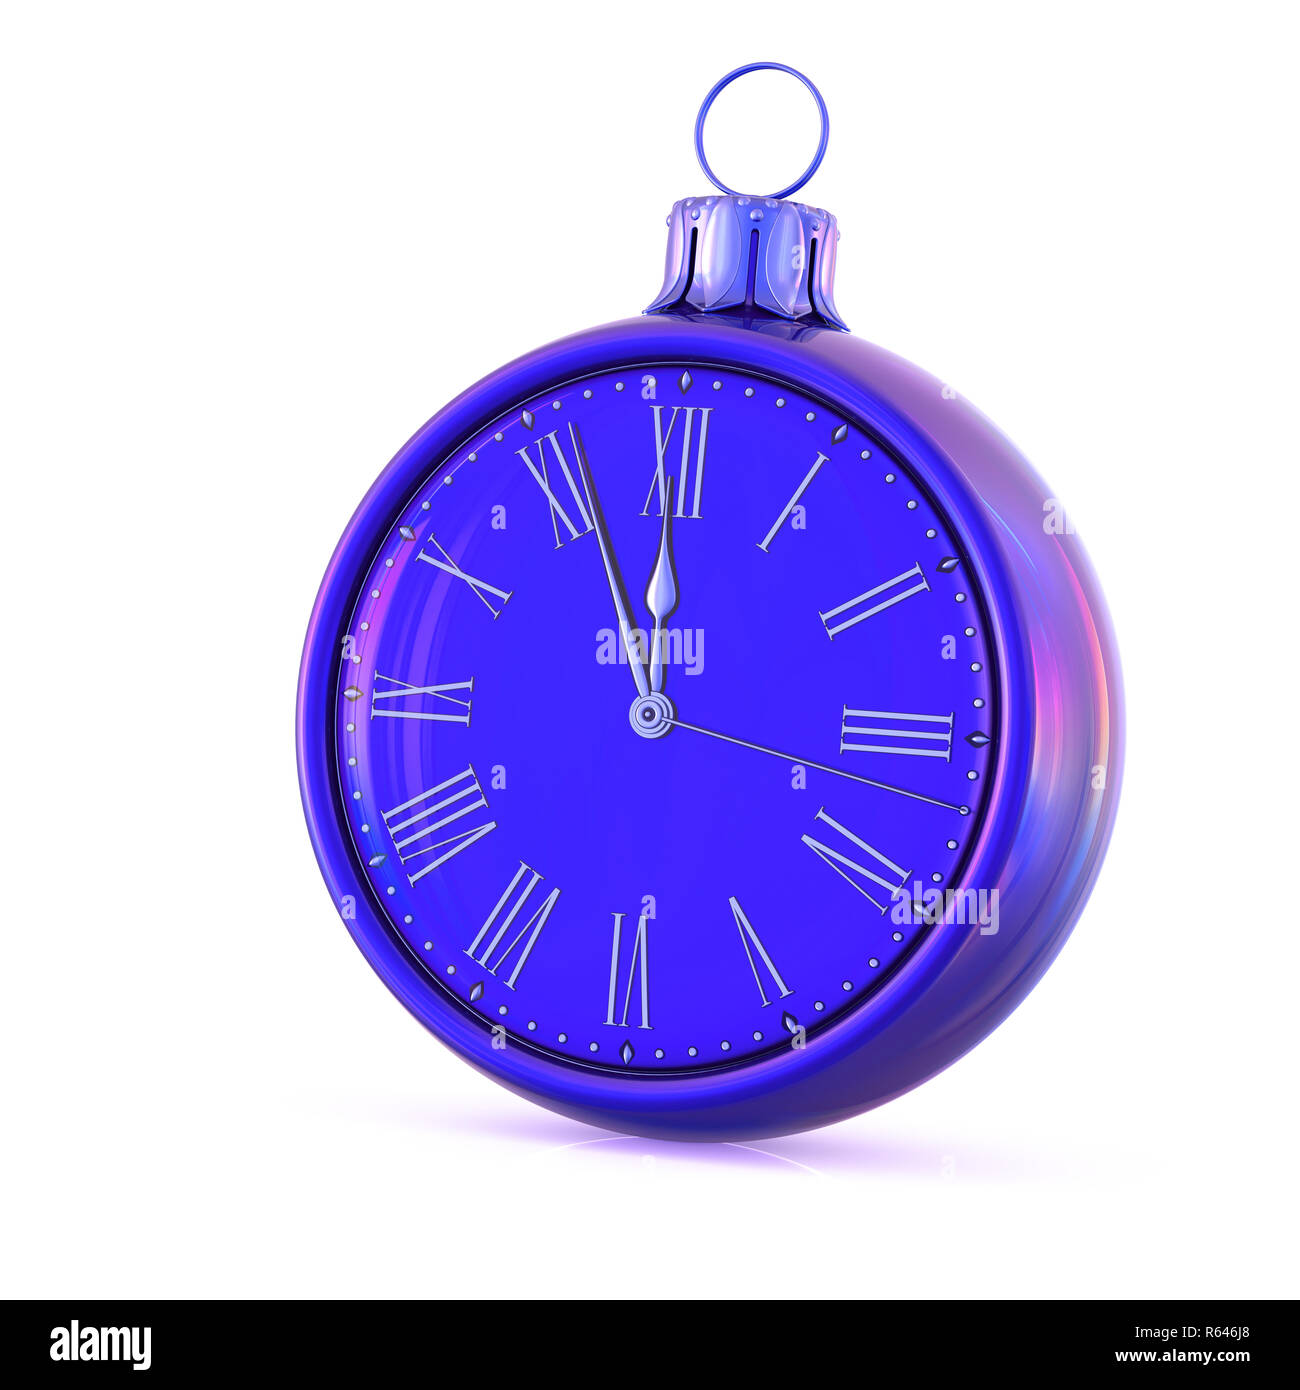 Clock Christmas ball blue New Year's Day midnight last hour countdown pressure. Decoration time ornament adornment bauble. Happy wintertime holidays b Stock Photo